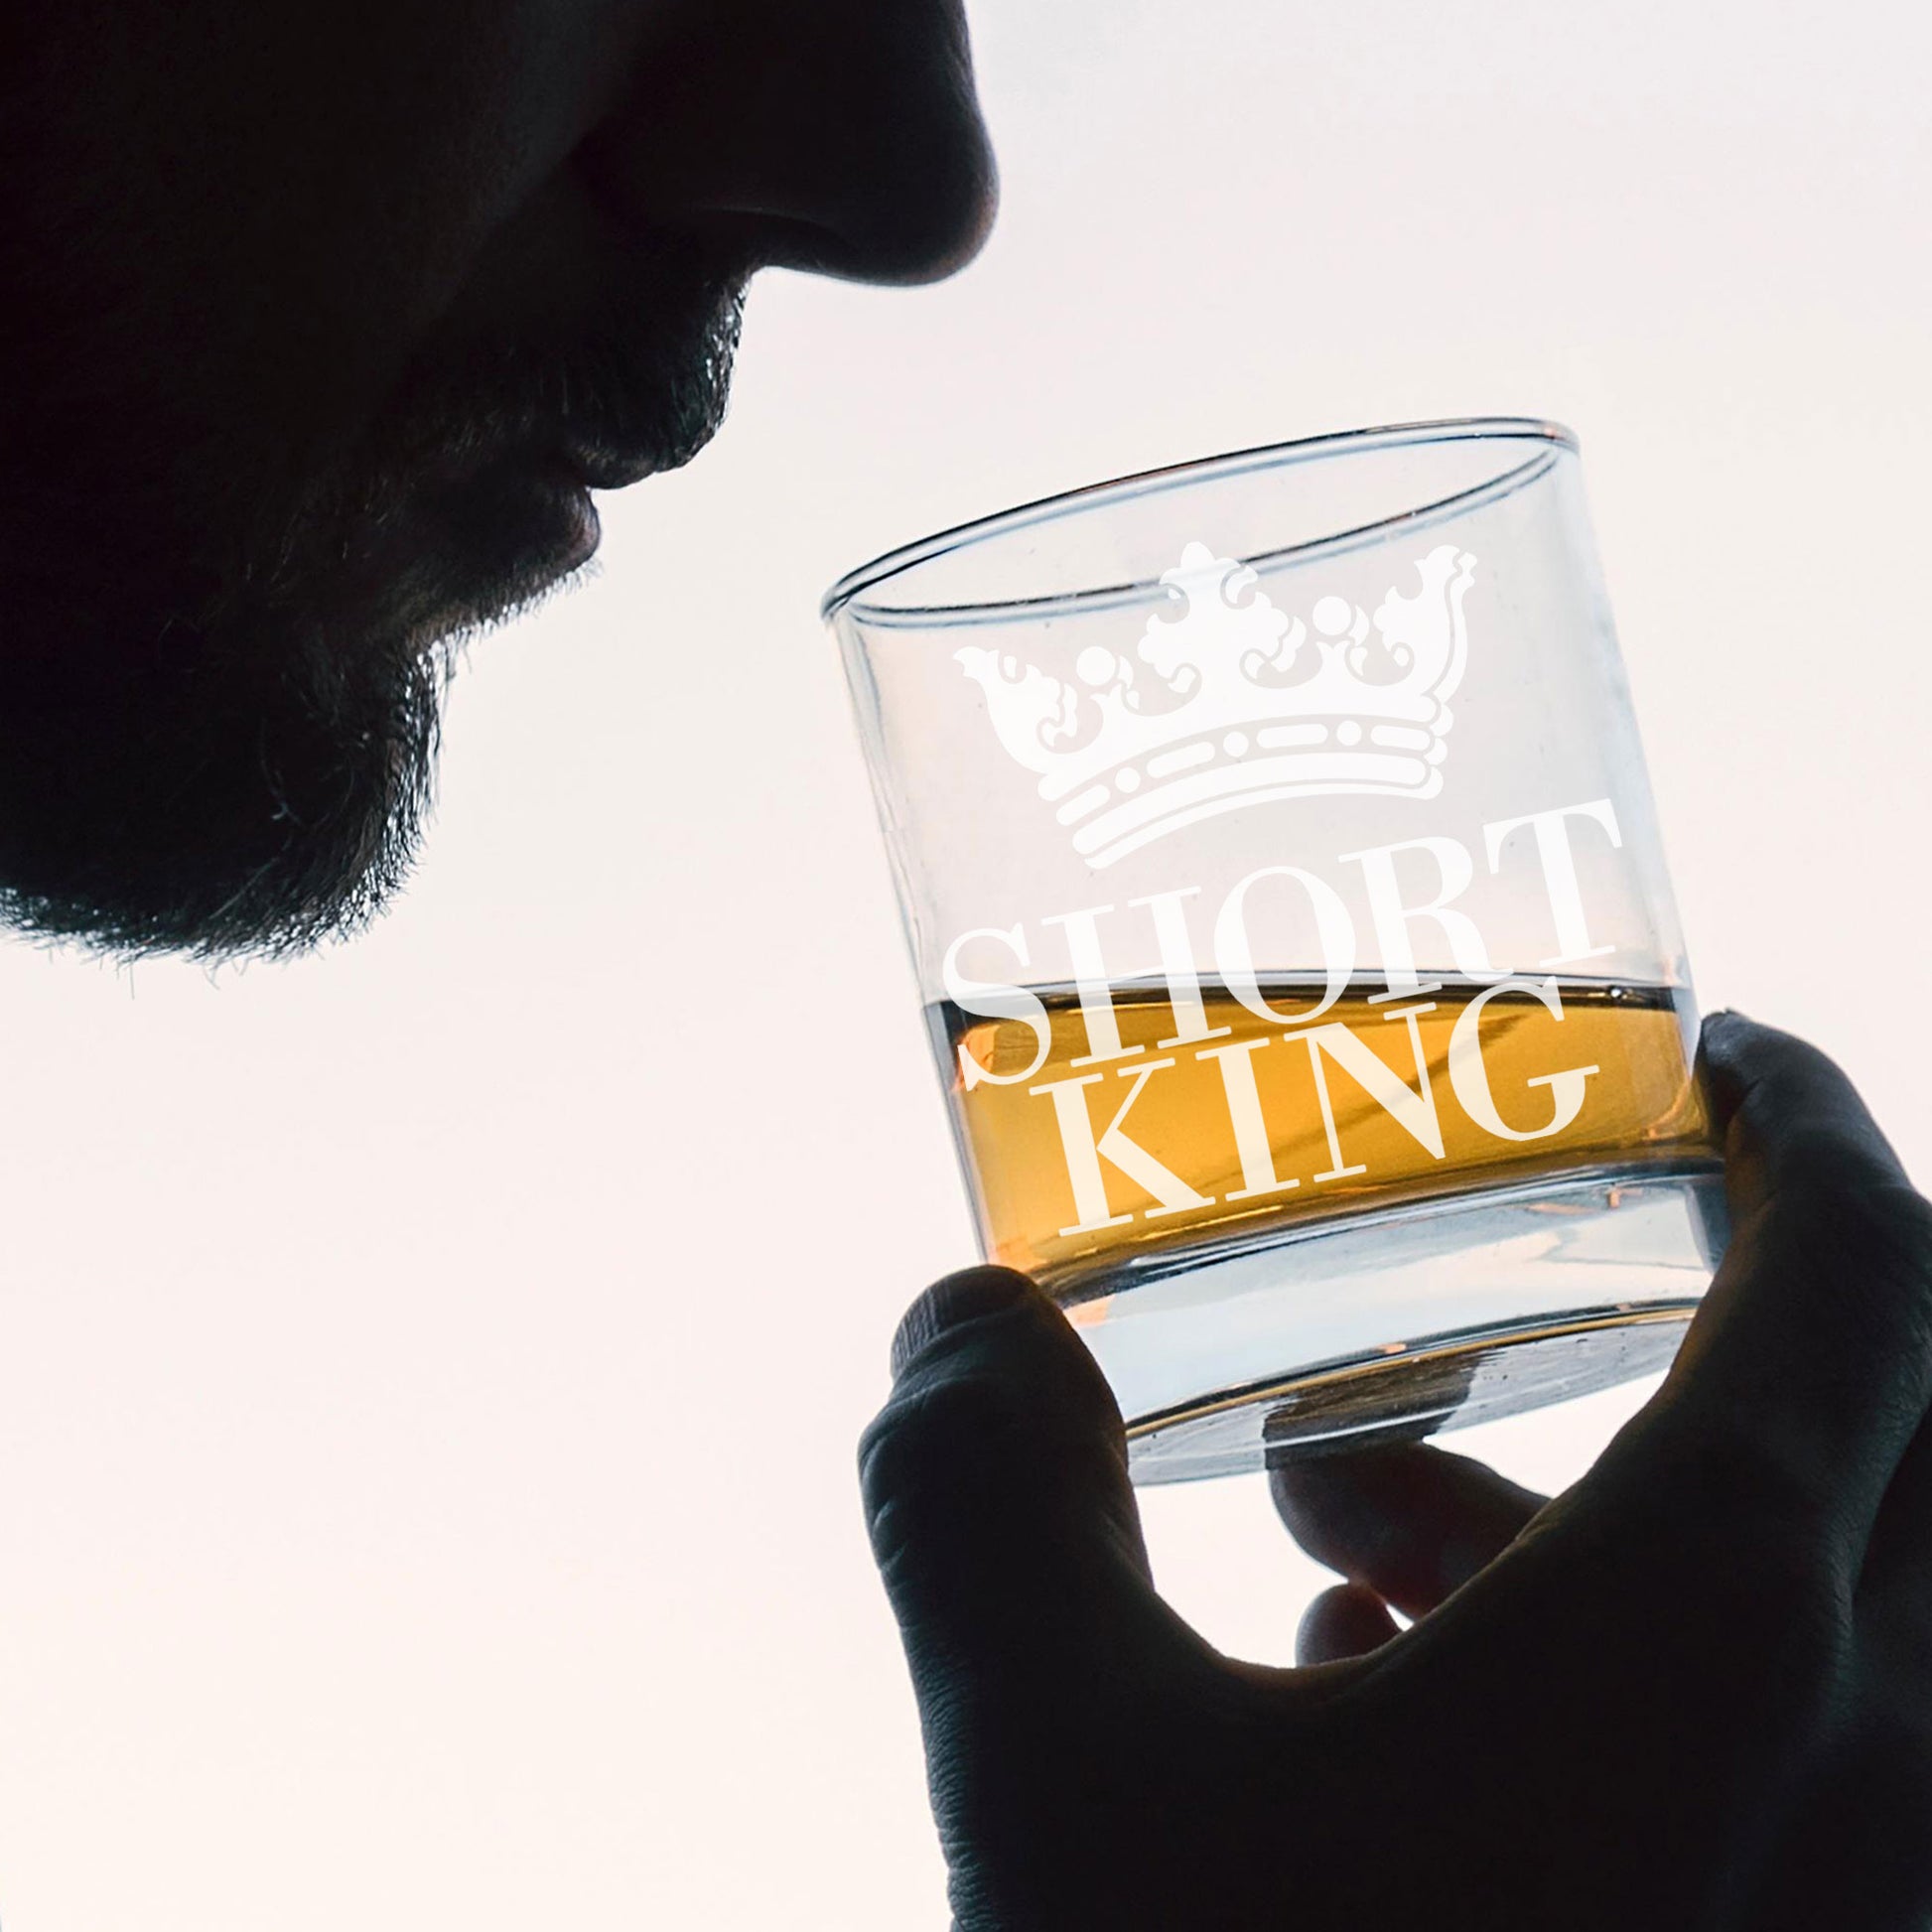 Short King Engraved Whisky Glass  - Always Looking Good -   